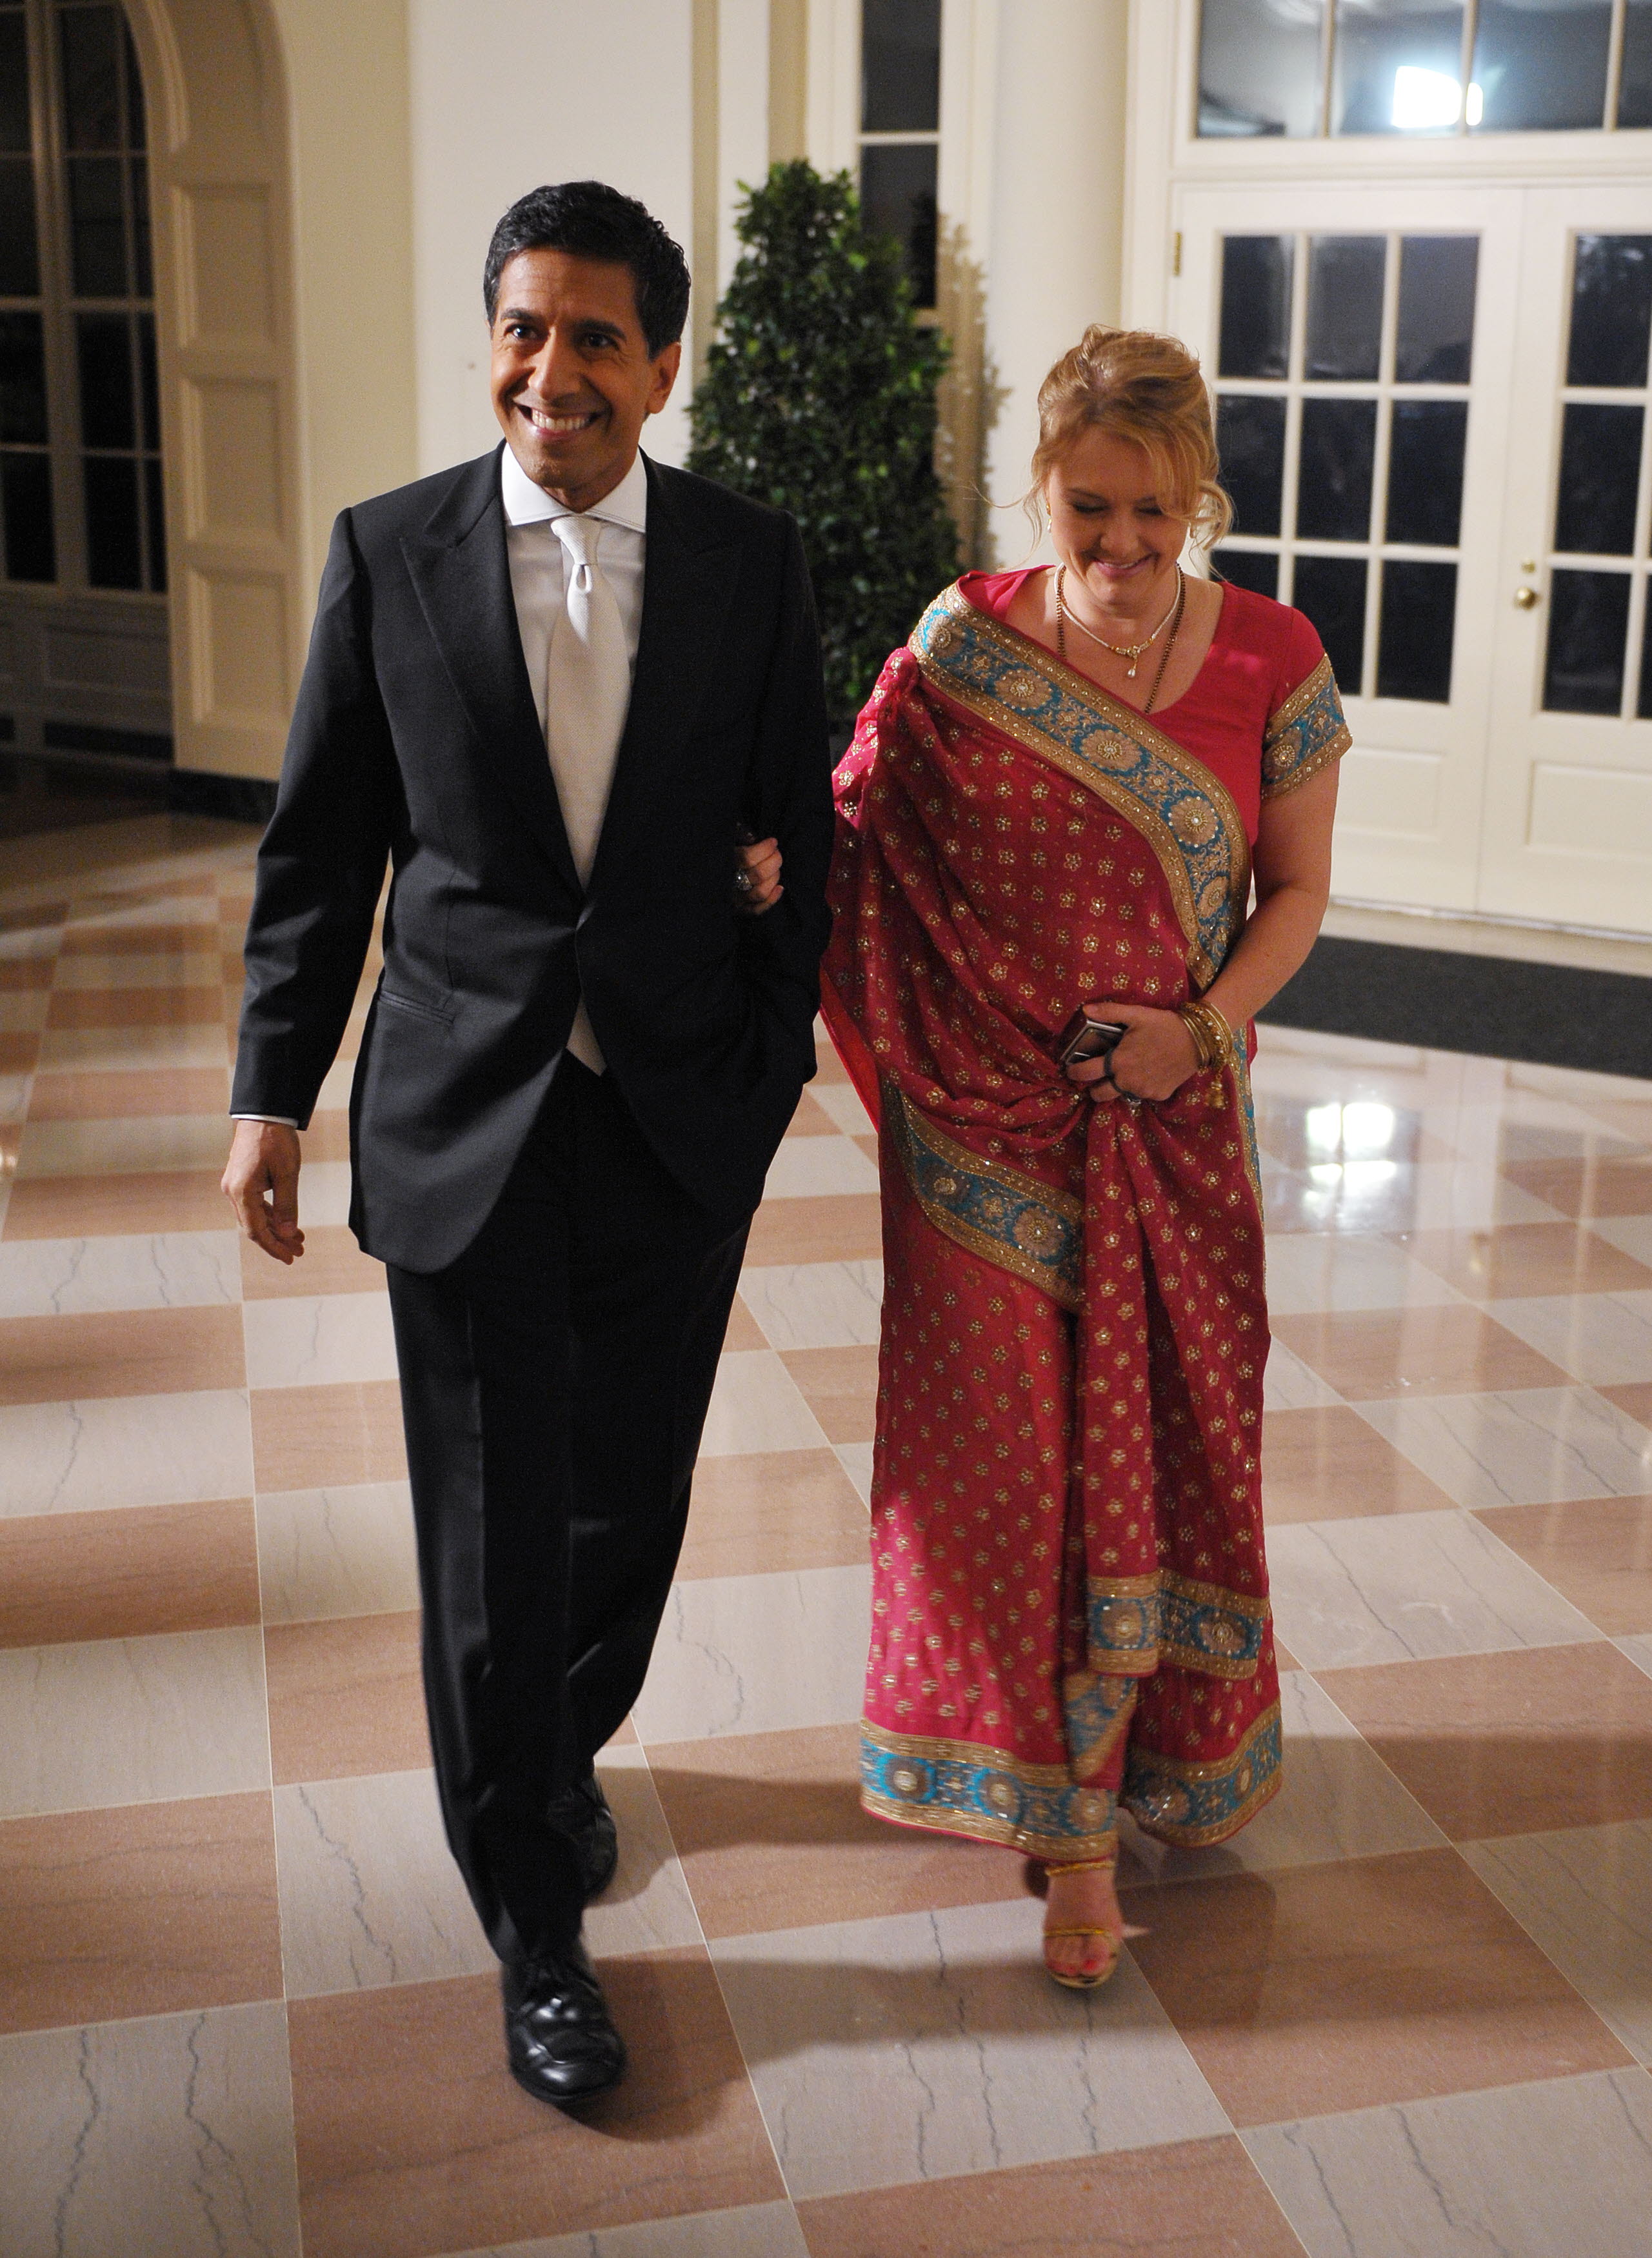 Sanjay Gupta and his wife Rebecca Olson Gupta on November 24, 2009, at the Booksellers area of the White House in Washington. | Source: Getty Images